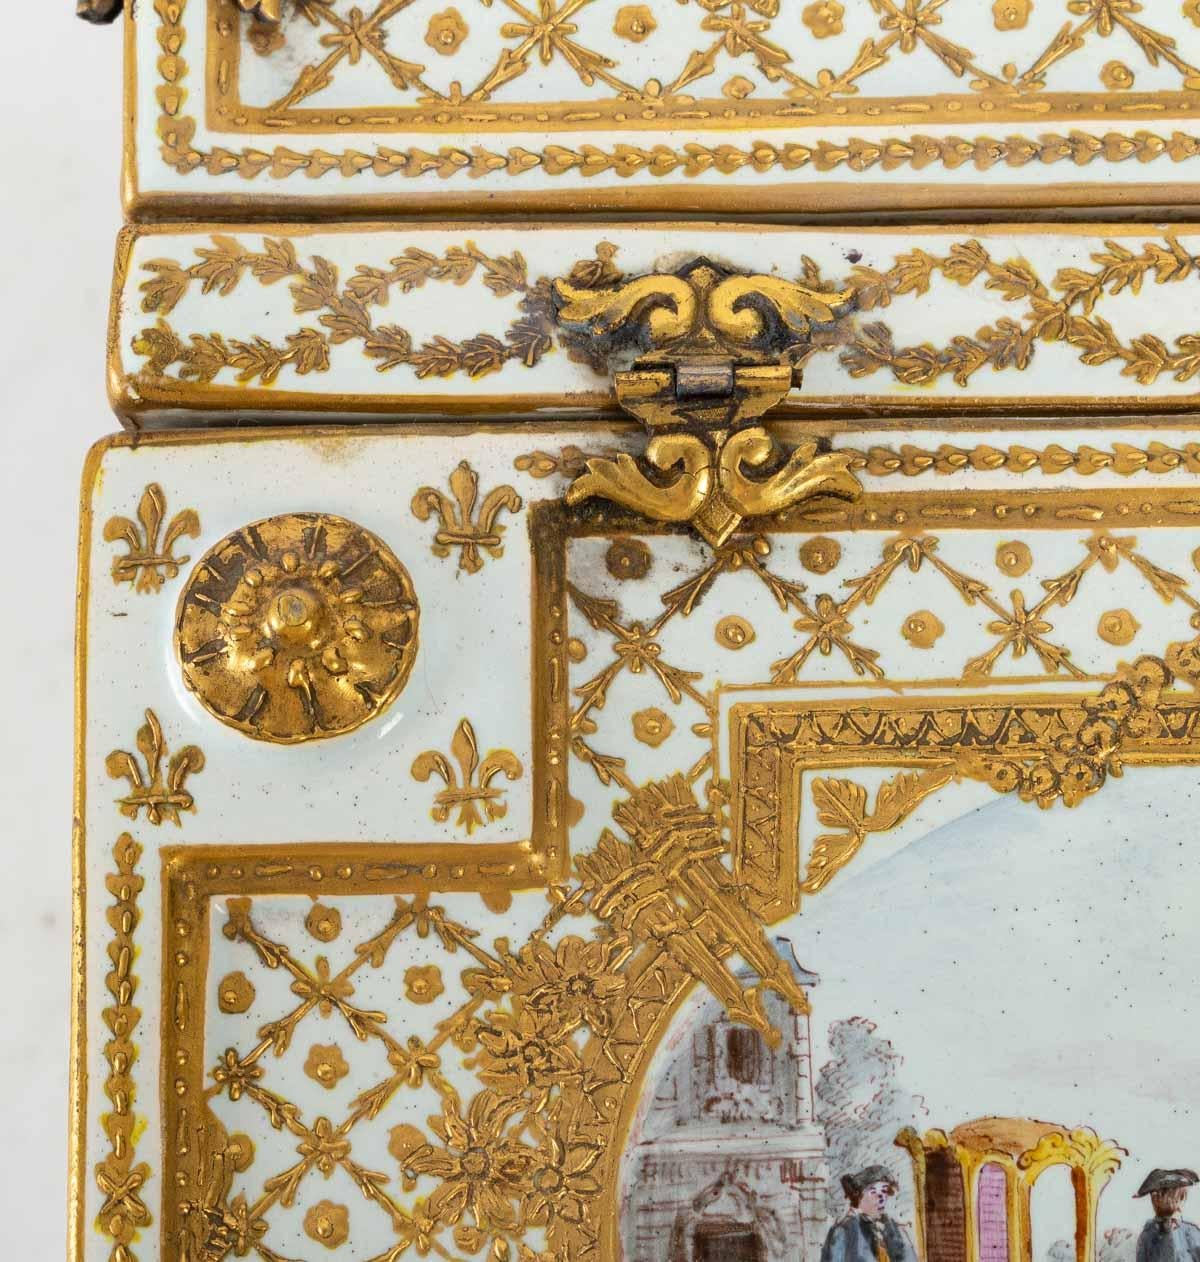 Beautiful 19th century German porcelain piano, Napoleon III period, painting and gold work on porcelain.
Measures: H: 17 cm, W: 36 cm, D: 18 cm.